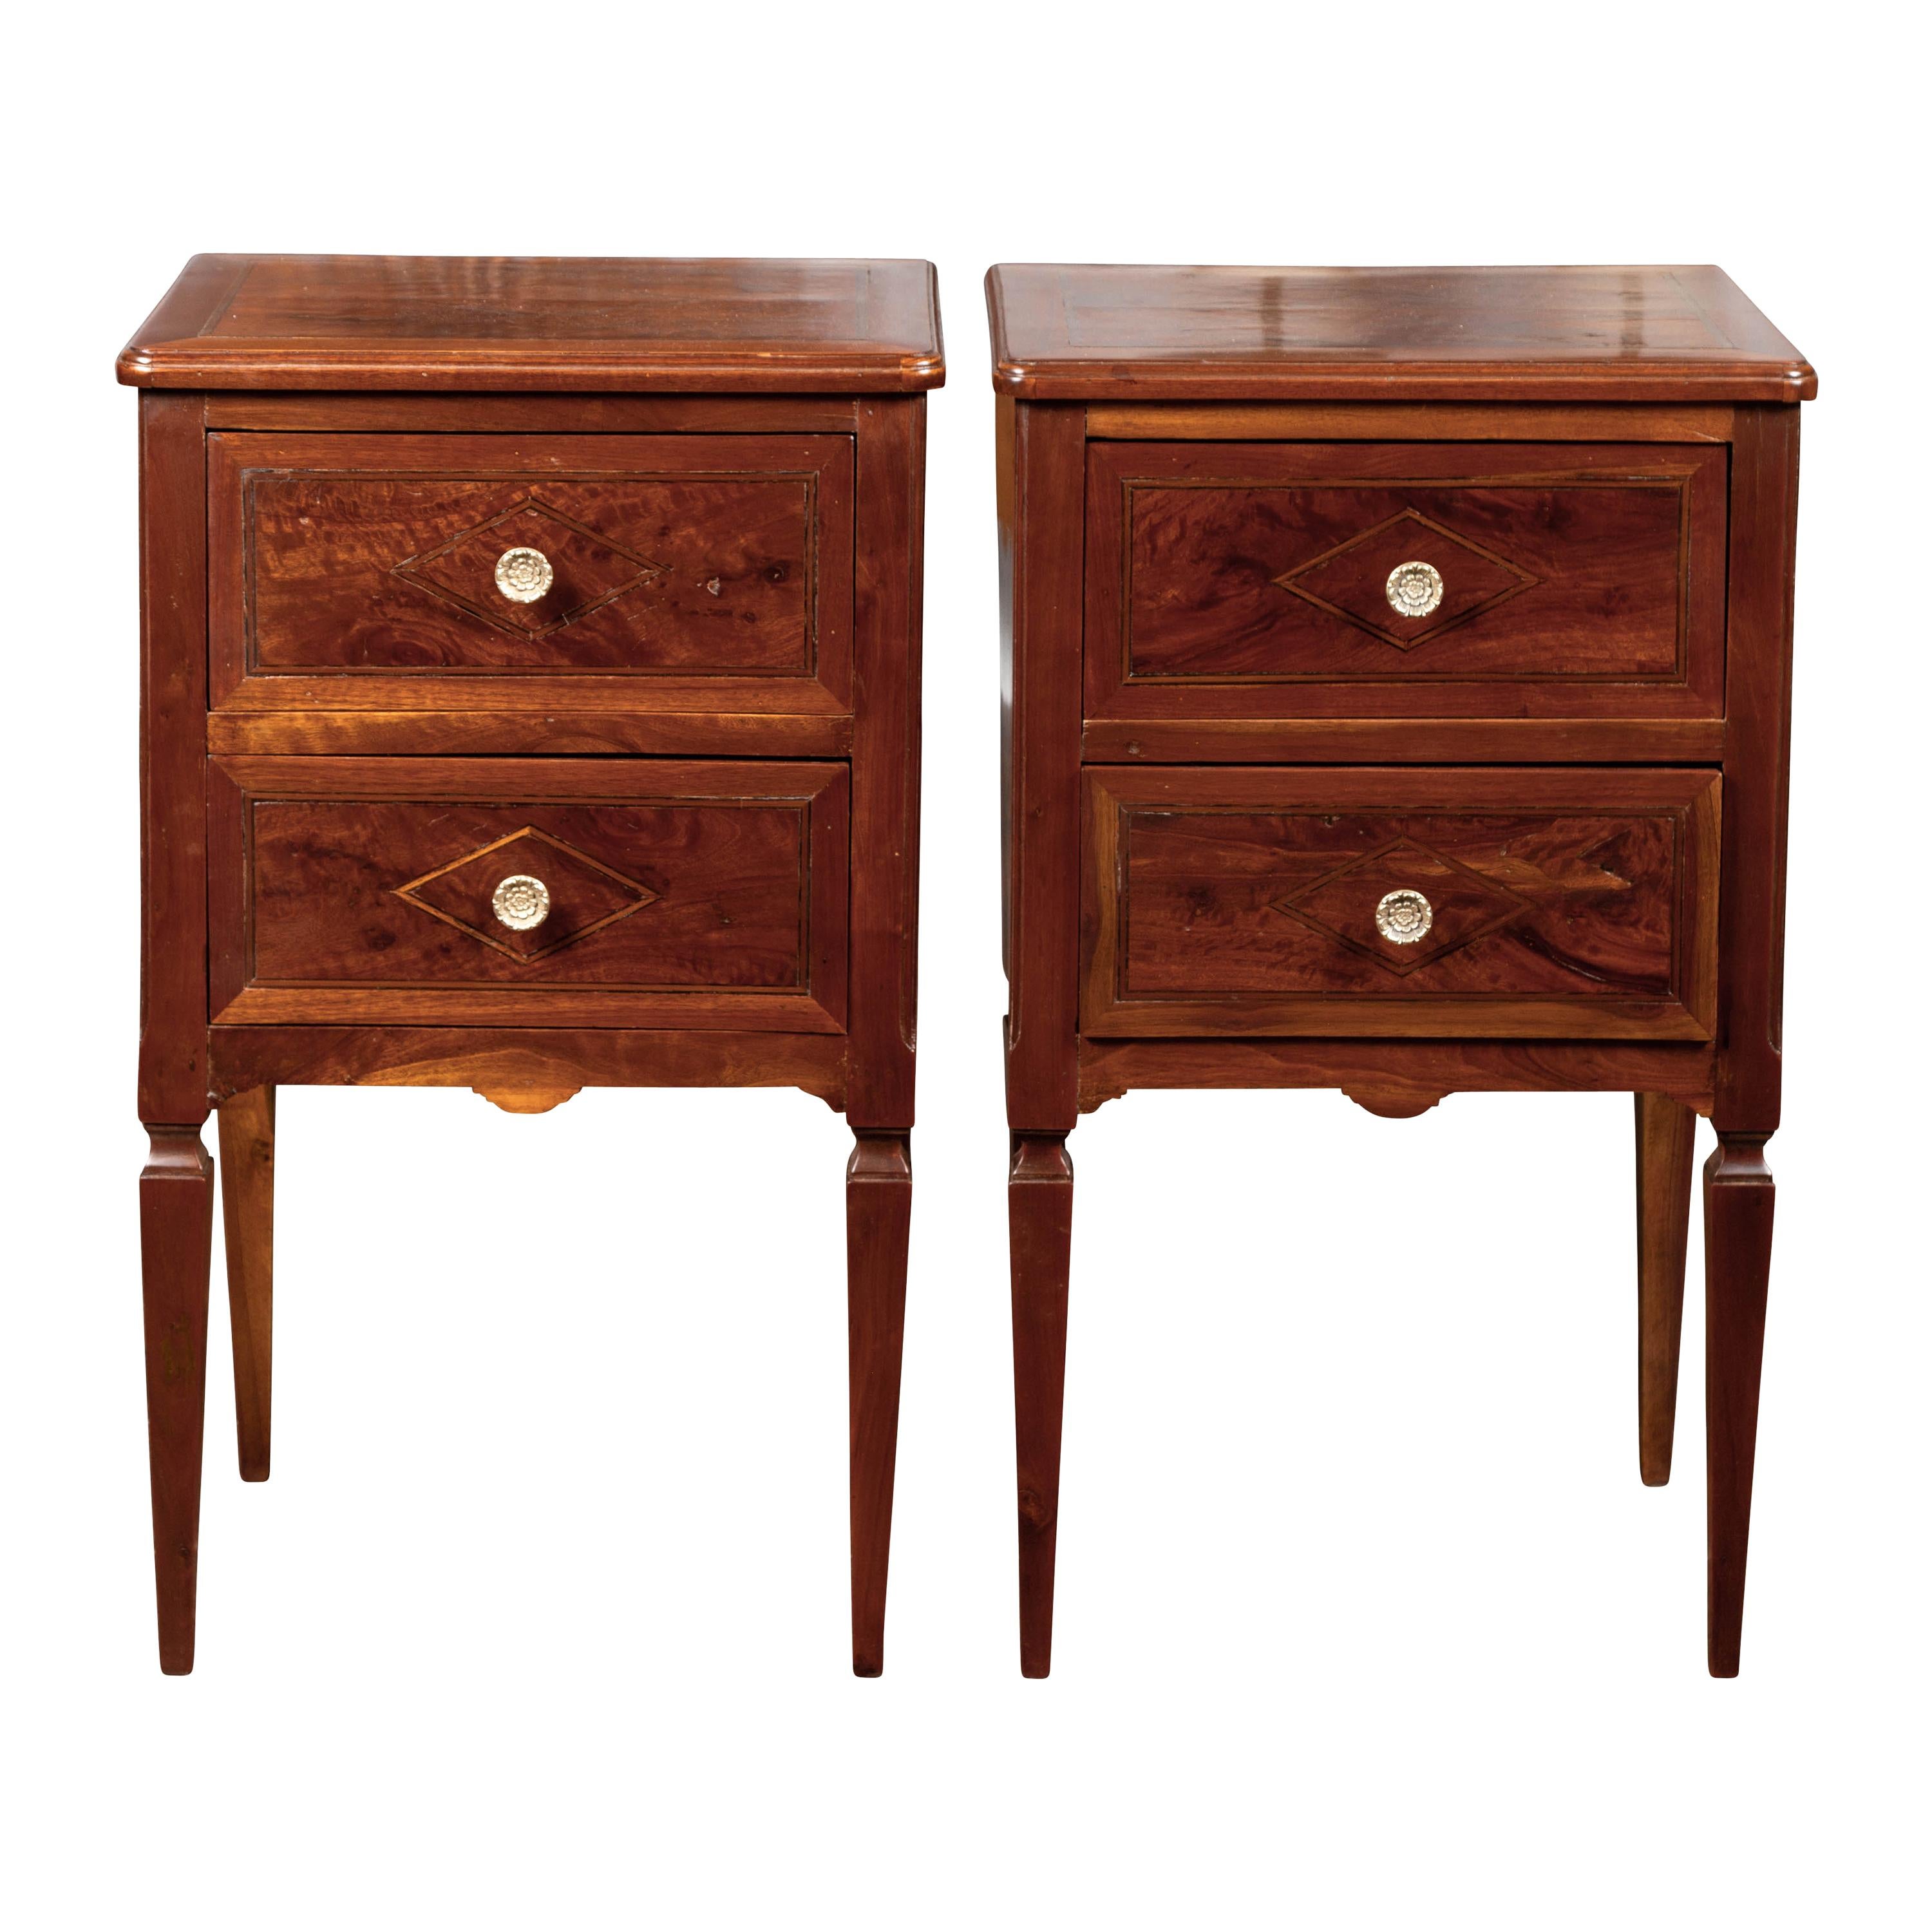 Pair of Italian Neoclassical Style 1840s Walnut Commodes with Banded Inlay